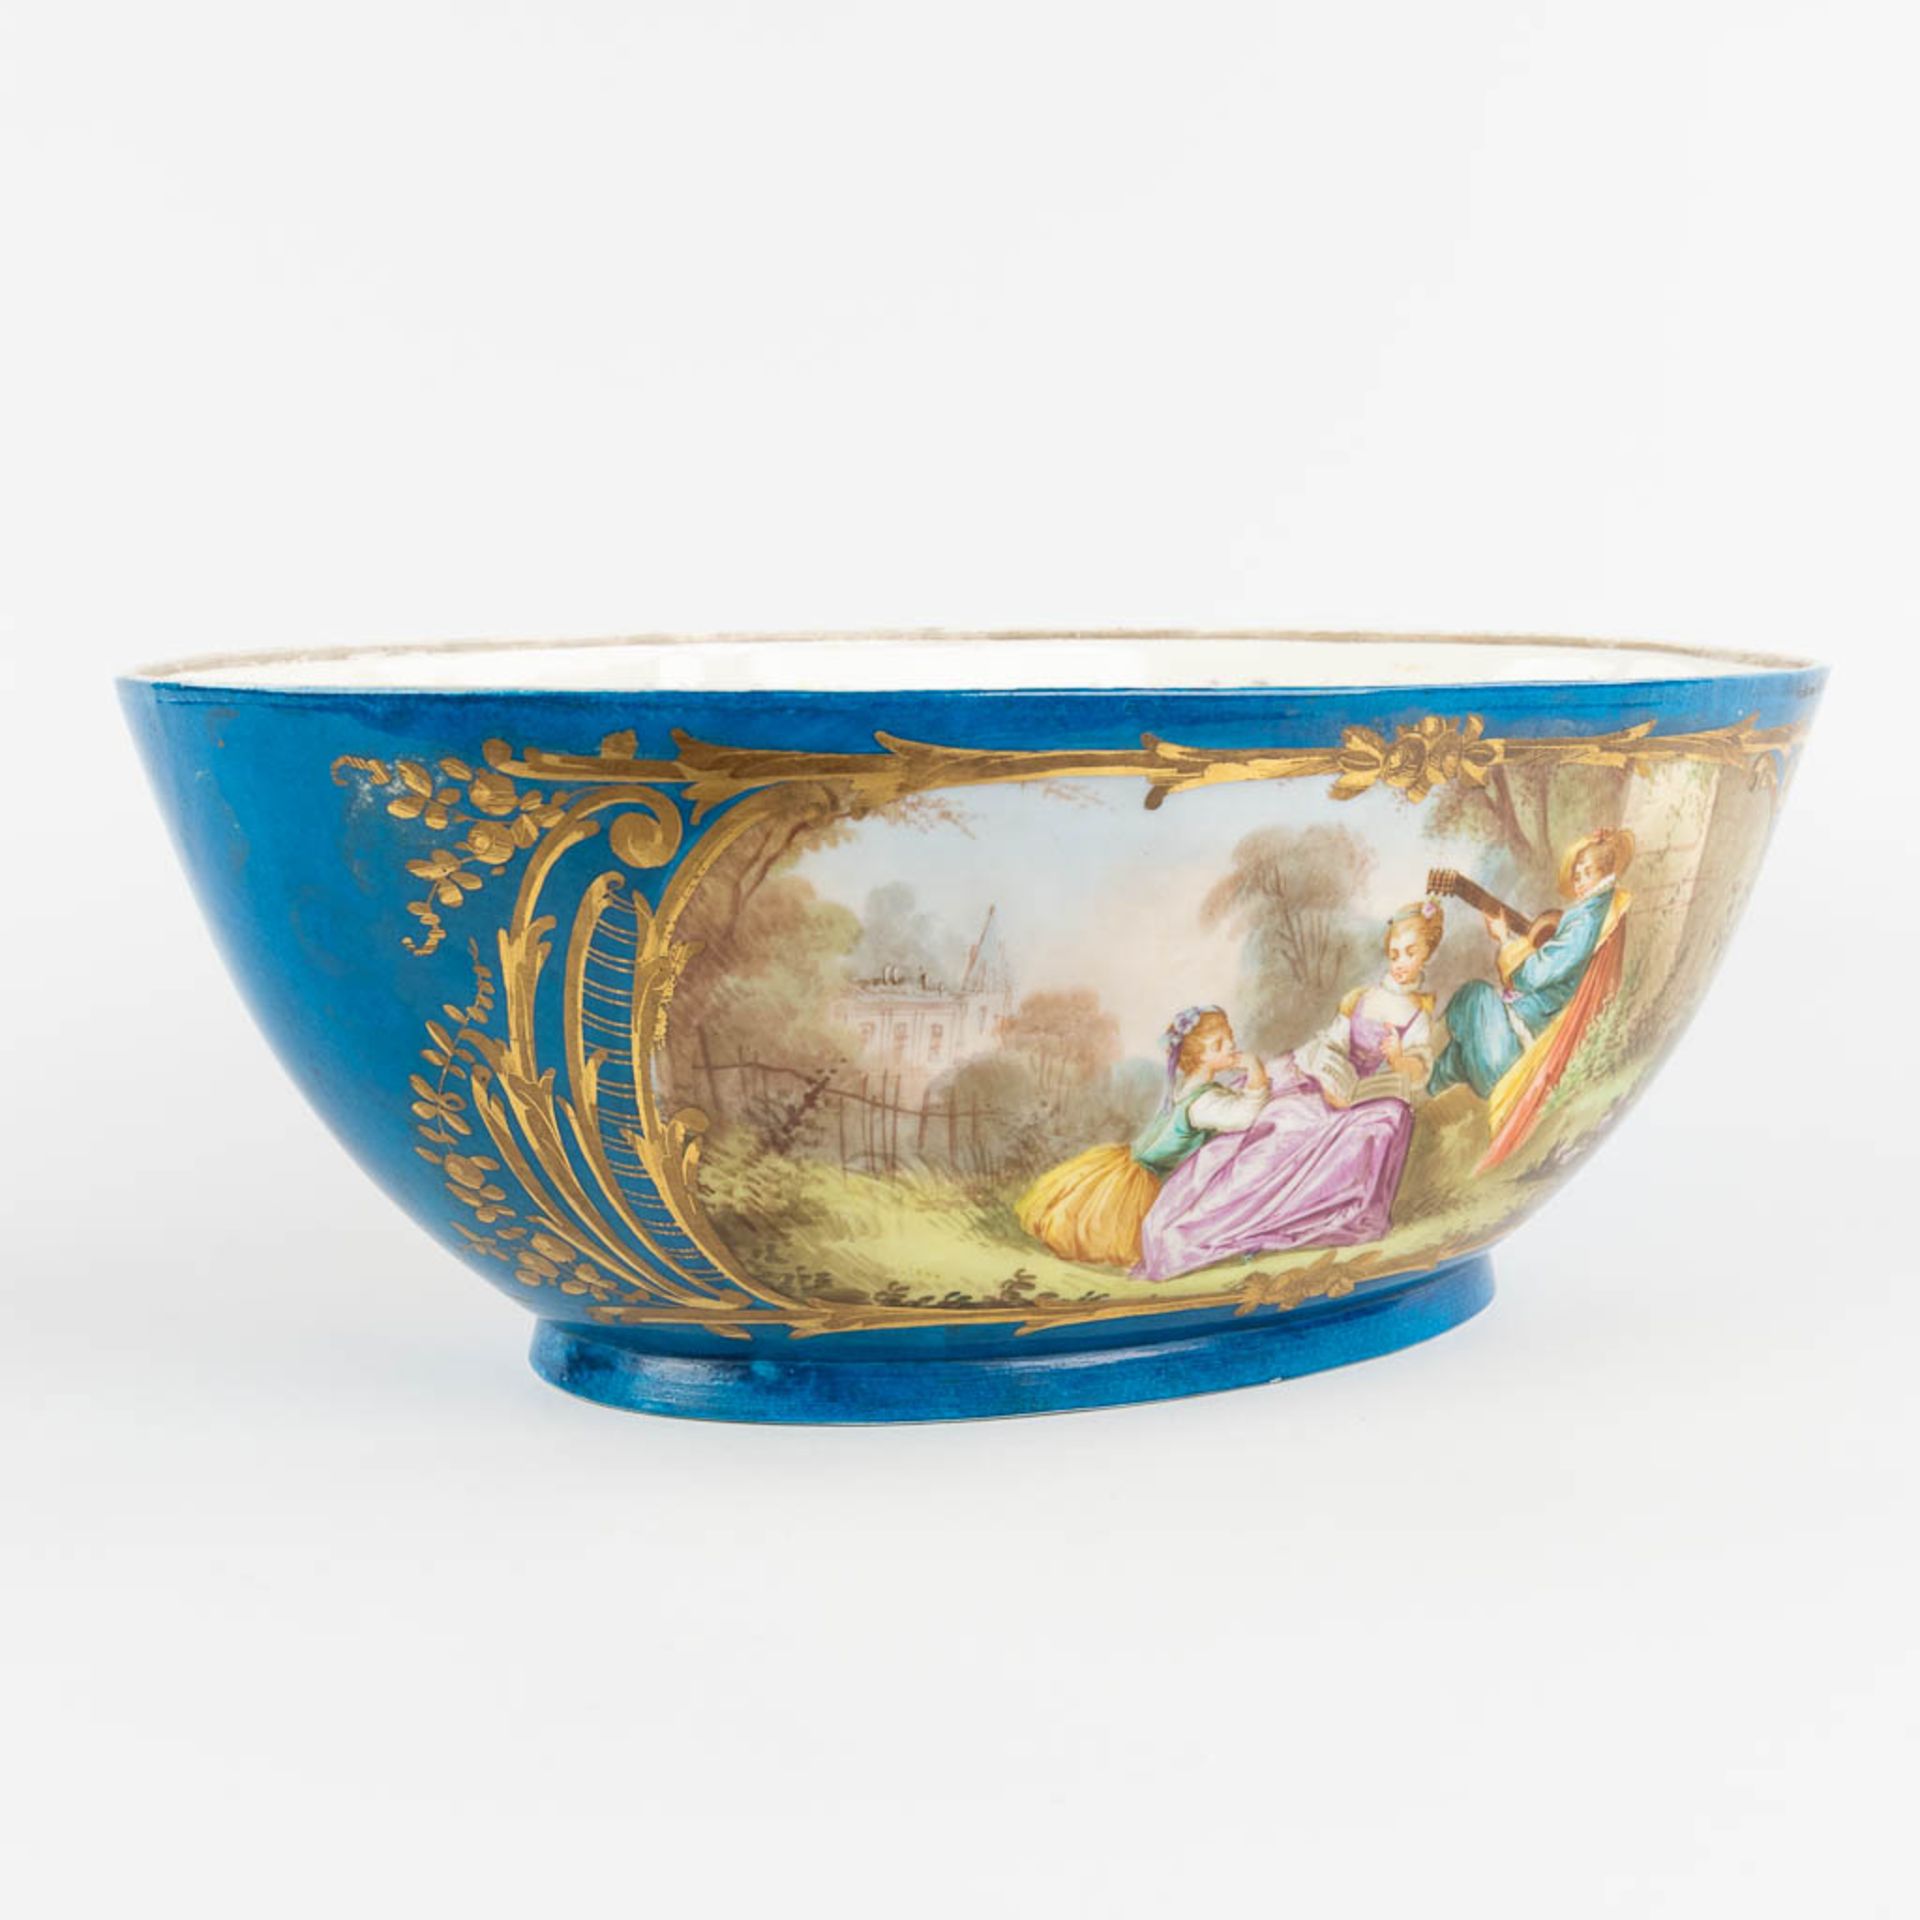 A large bowl, blue glaze with hand-painted decor, probably Limoges. (L:24 x W:39 x H:14 cm) - Image 3 of 12